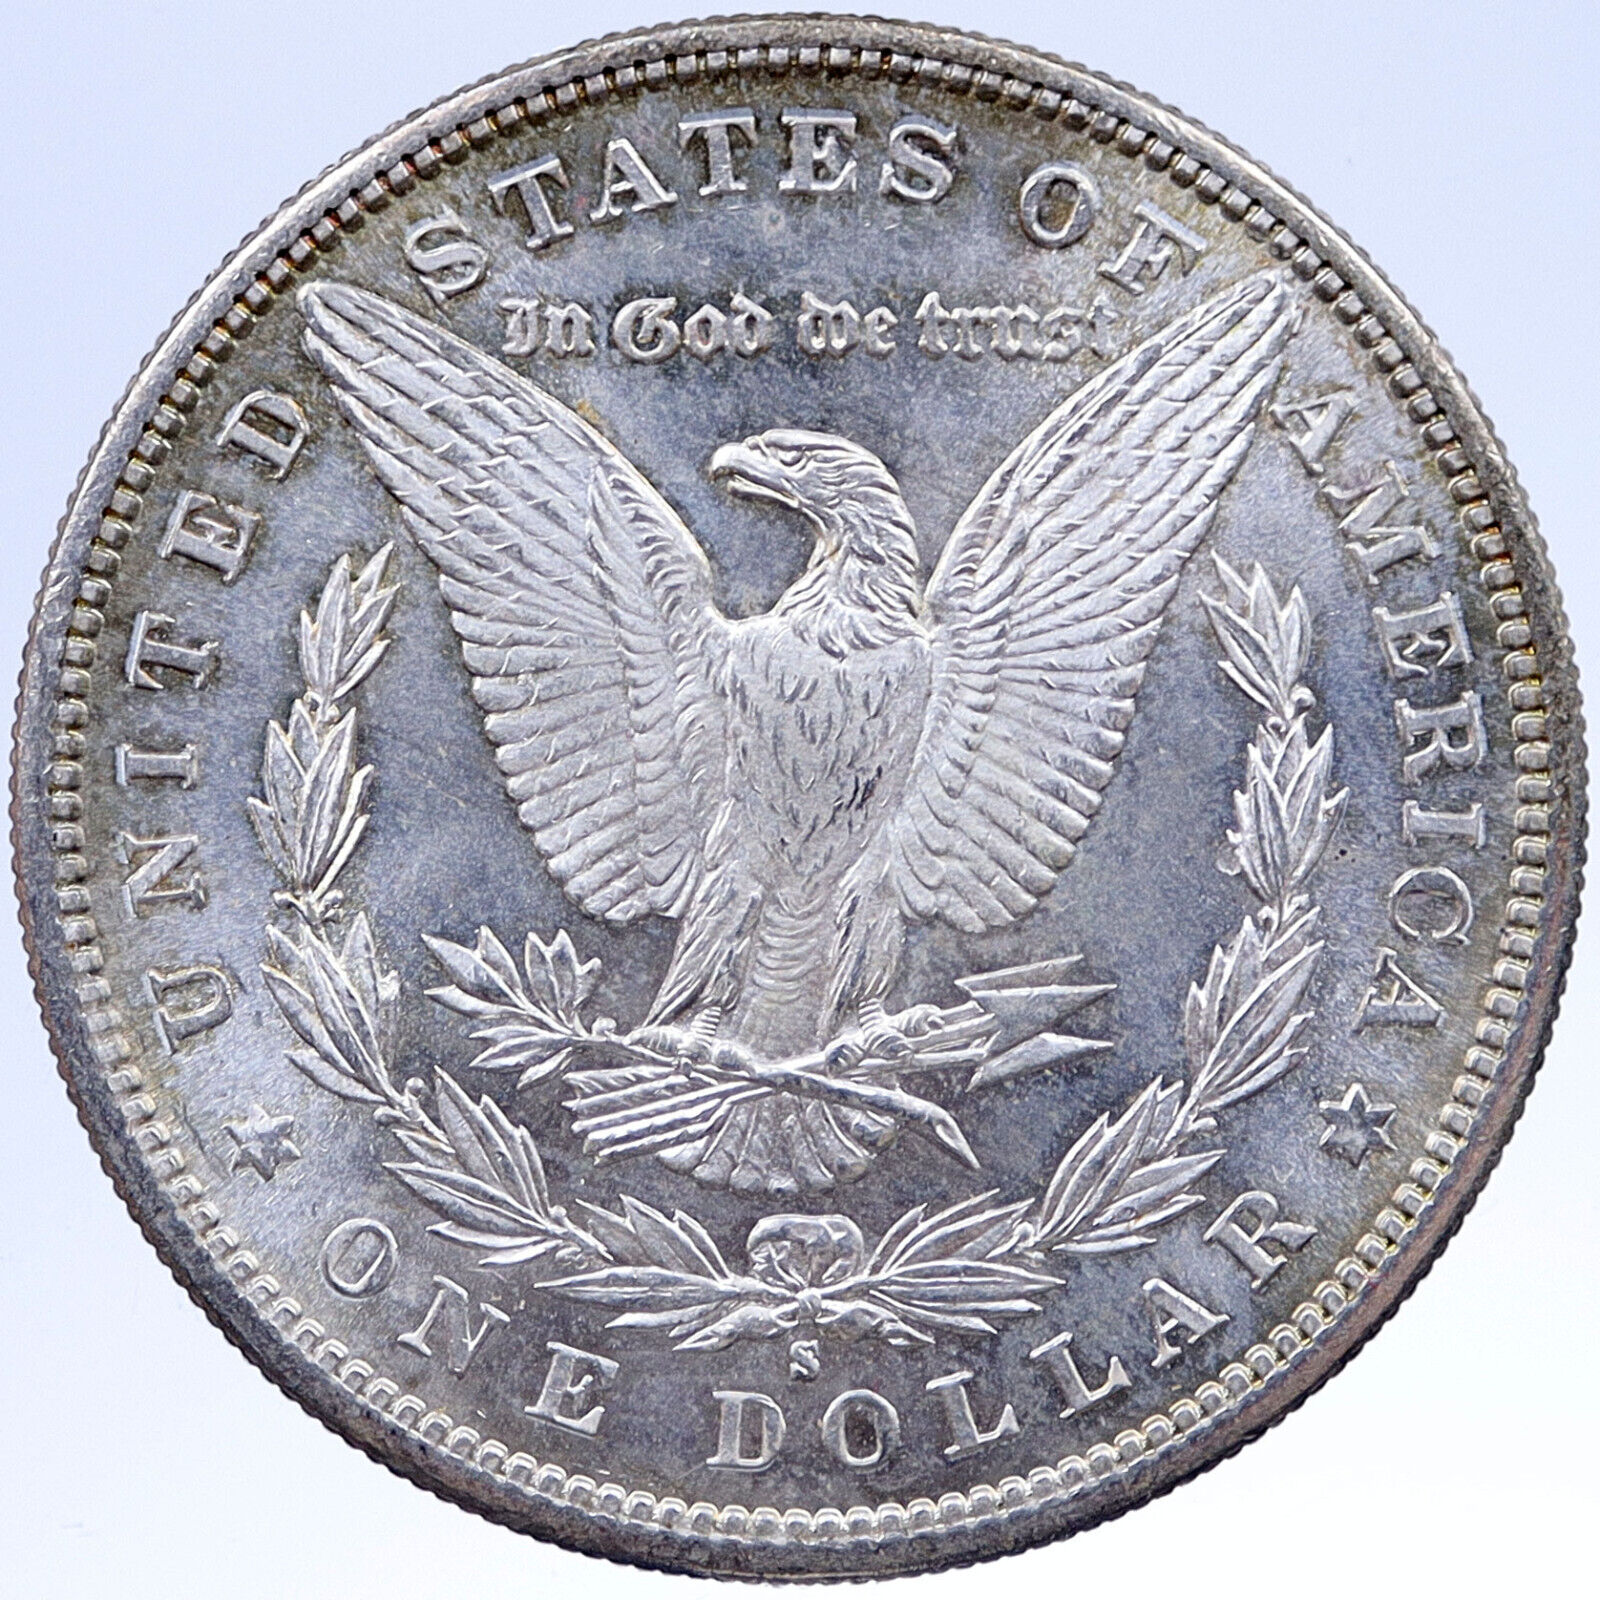 1881 S UNITED STATES of America EAGLE Old SILVER Morgan US Dollar Coin i119351